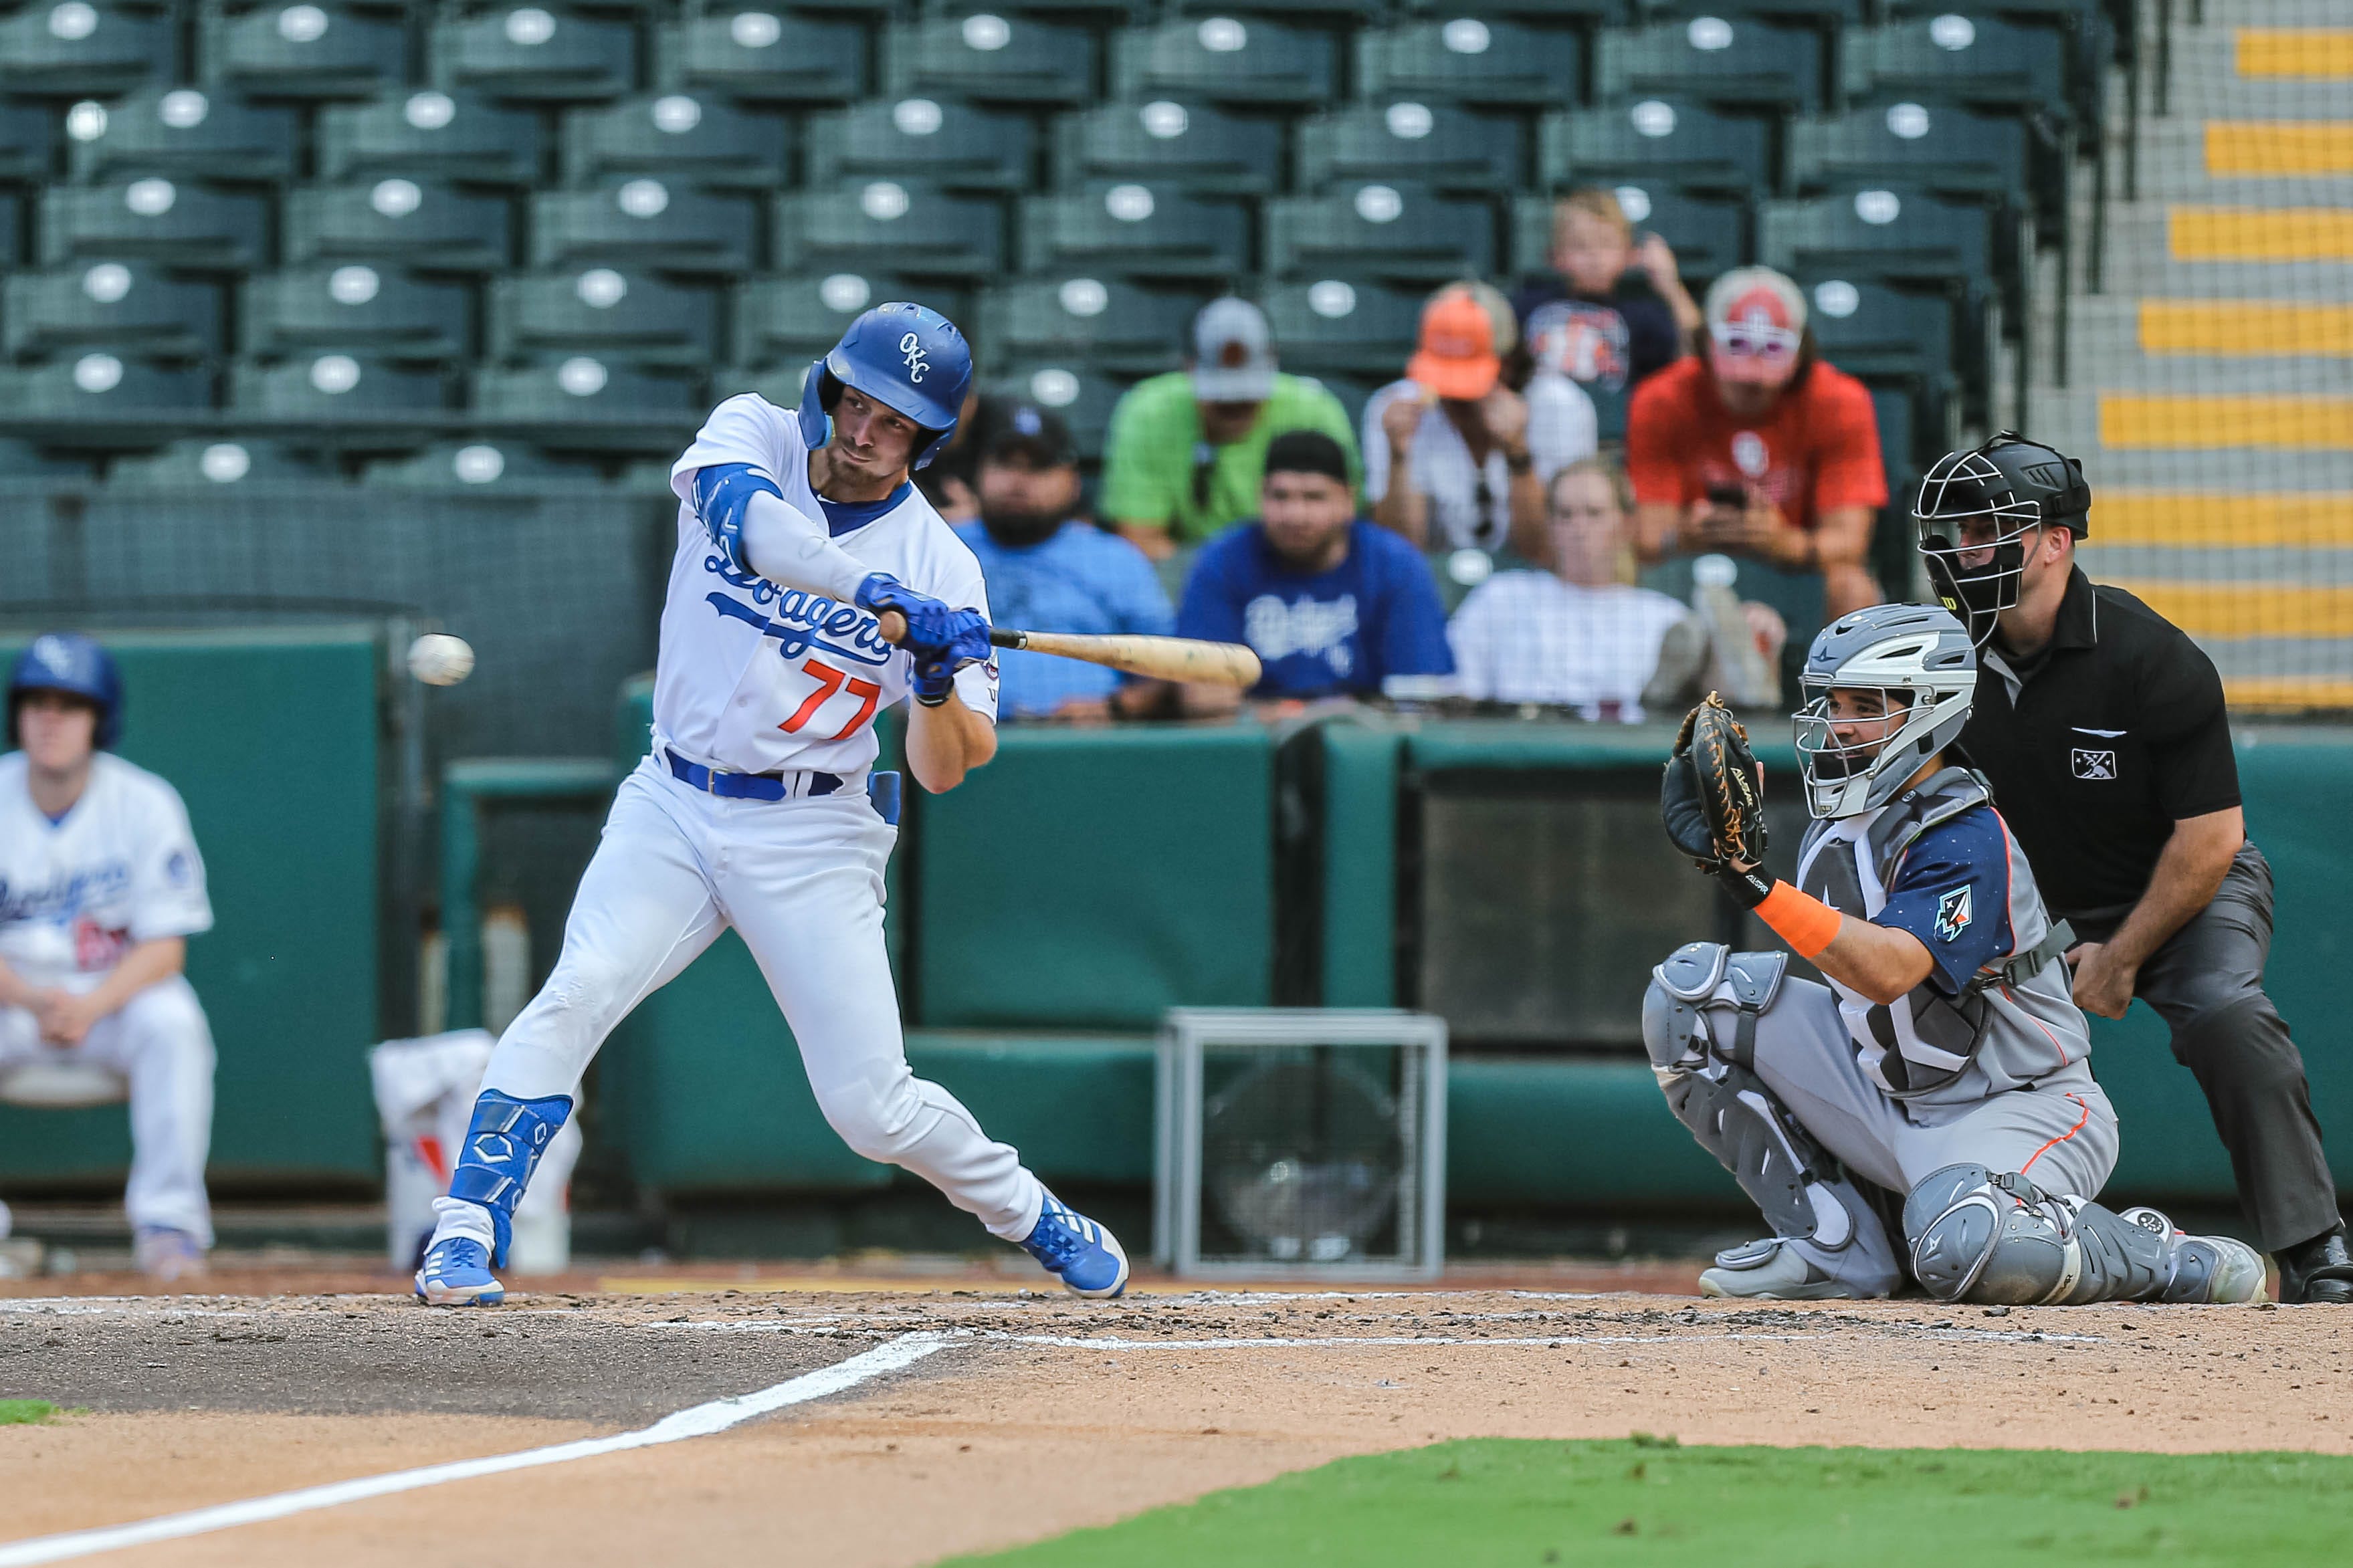 Michael Busch (77) takes the plate as the Oklahoma City Dodgers face the Sugar Land Space Cowboys at Chickasaw Bricktown Ballpark in Downtown Oklahoma City on Wednesday, July 27, 2022.